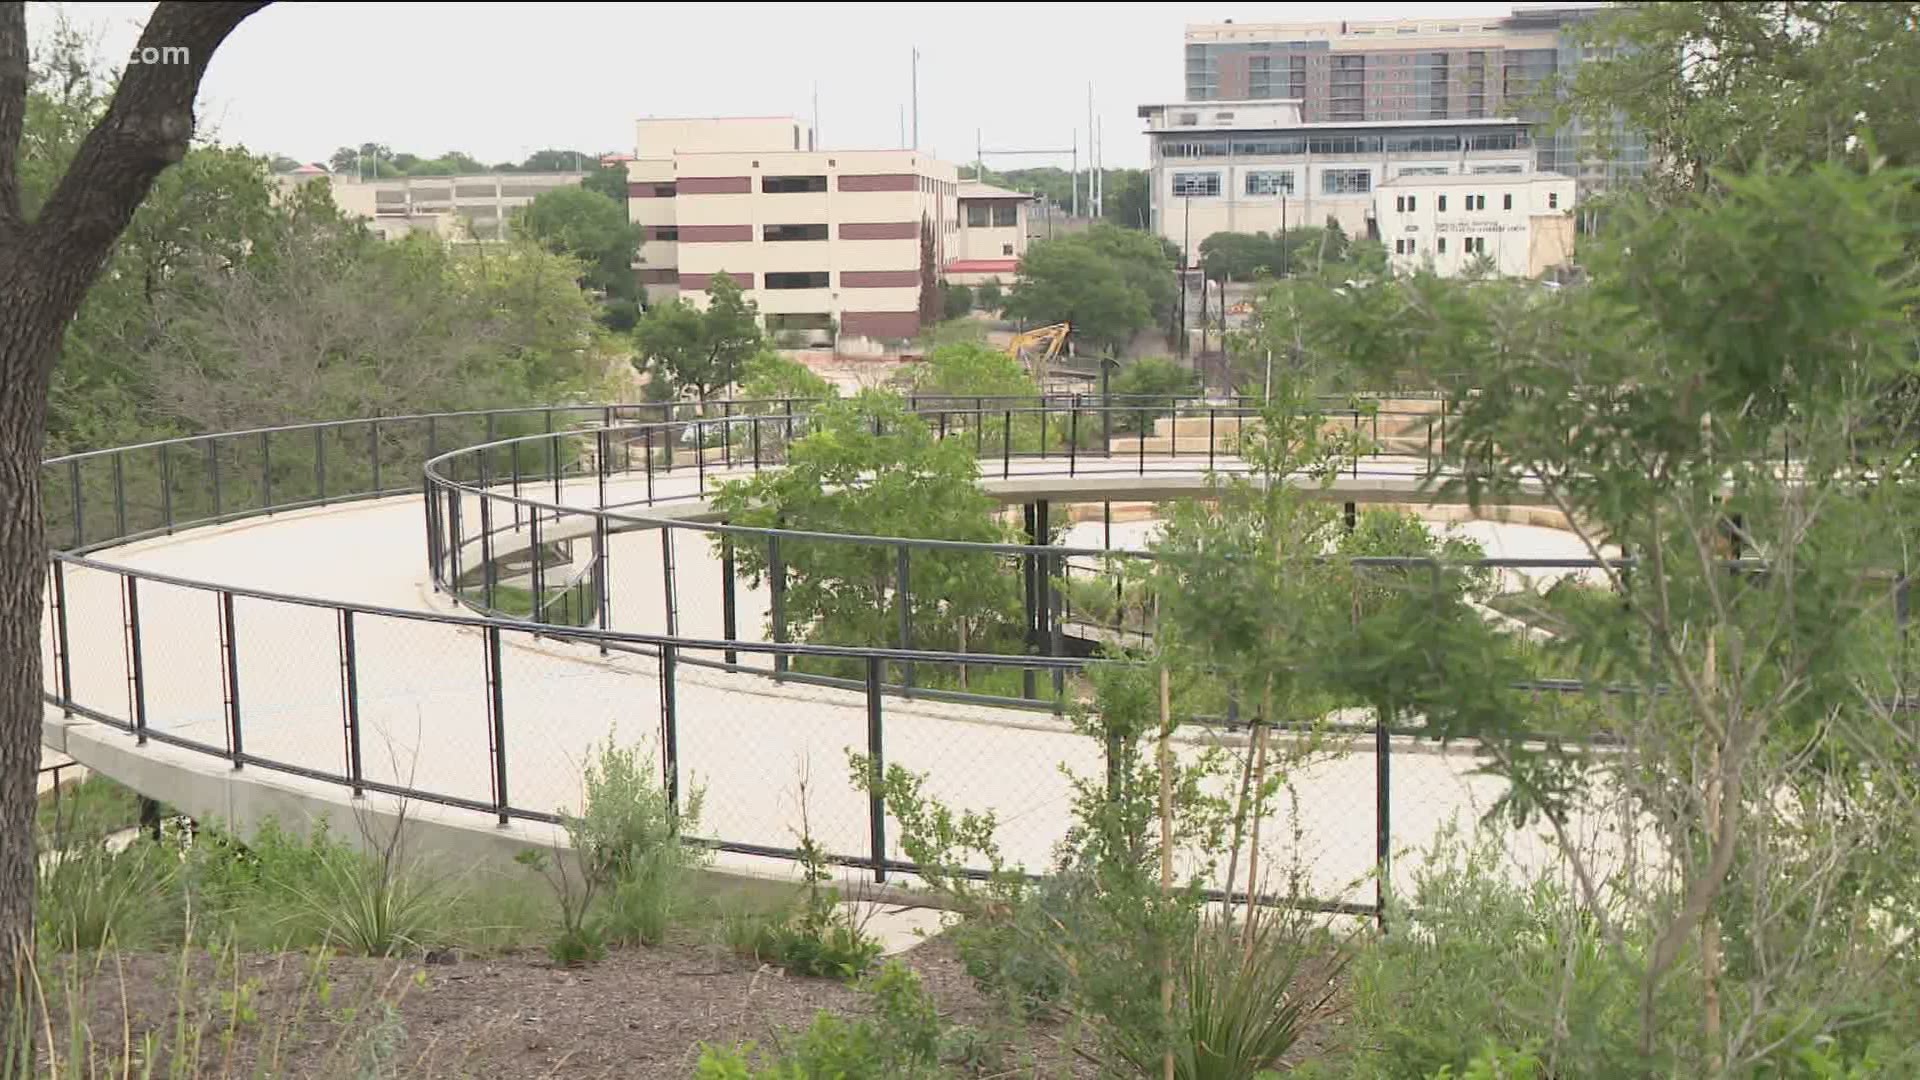 The grand opening of Waterloo Park and the Moody Amphitheater in Downtown Austin has been announced. KVUE's Tori Larned joined us live from the park.